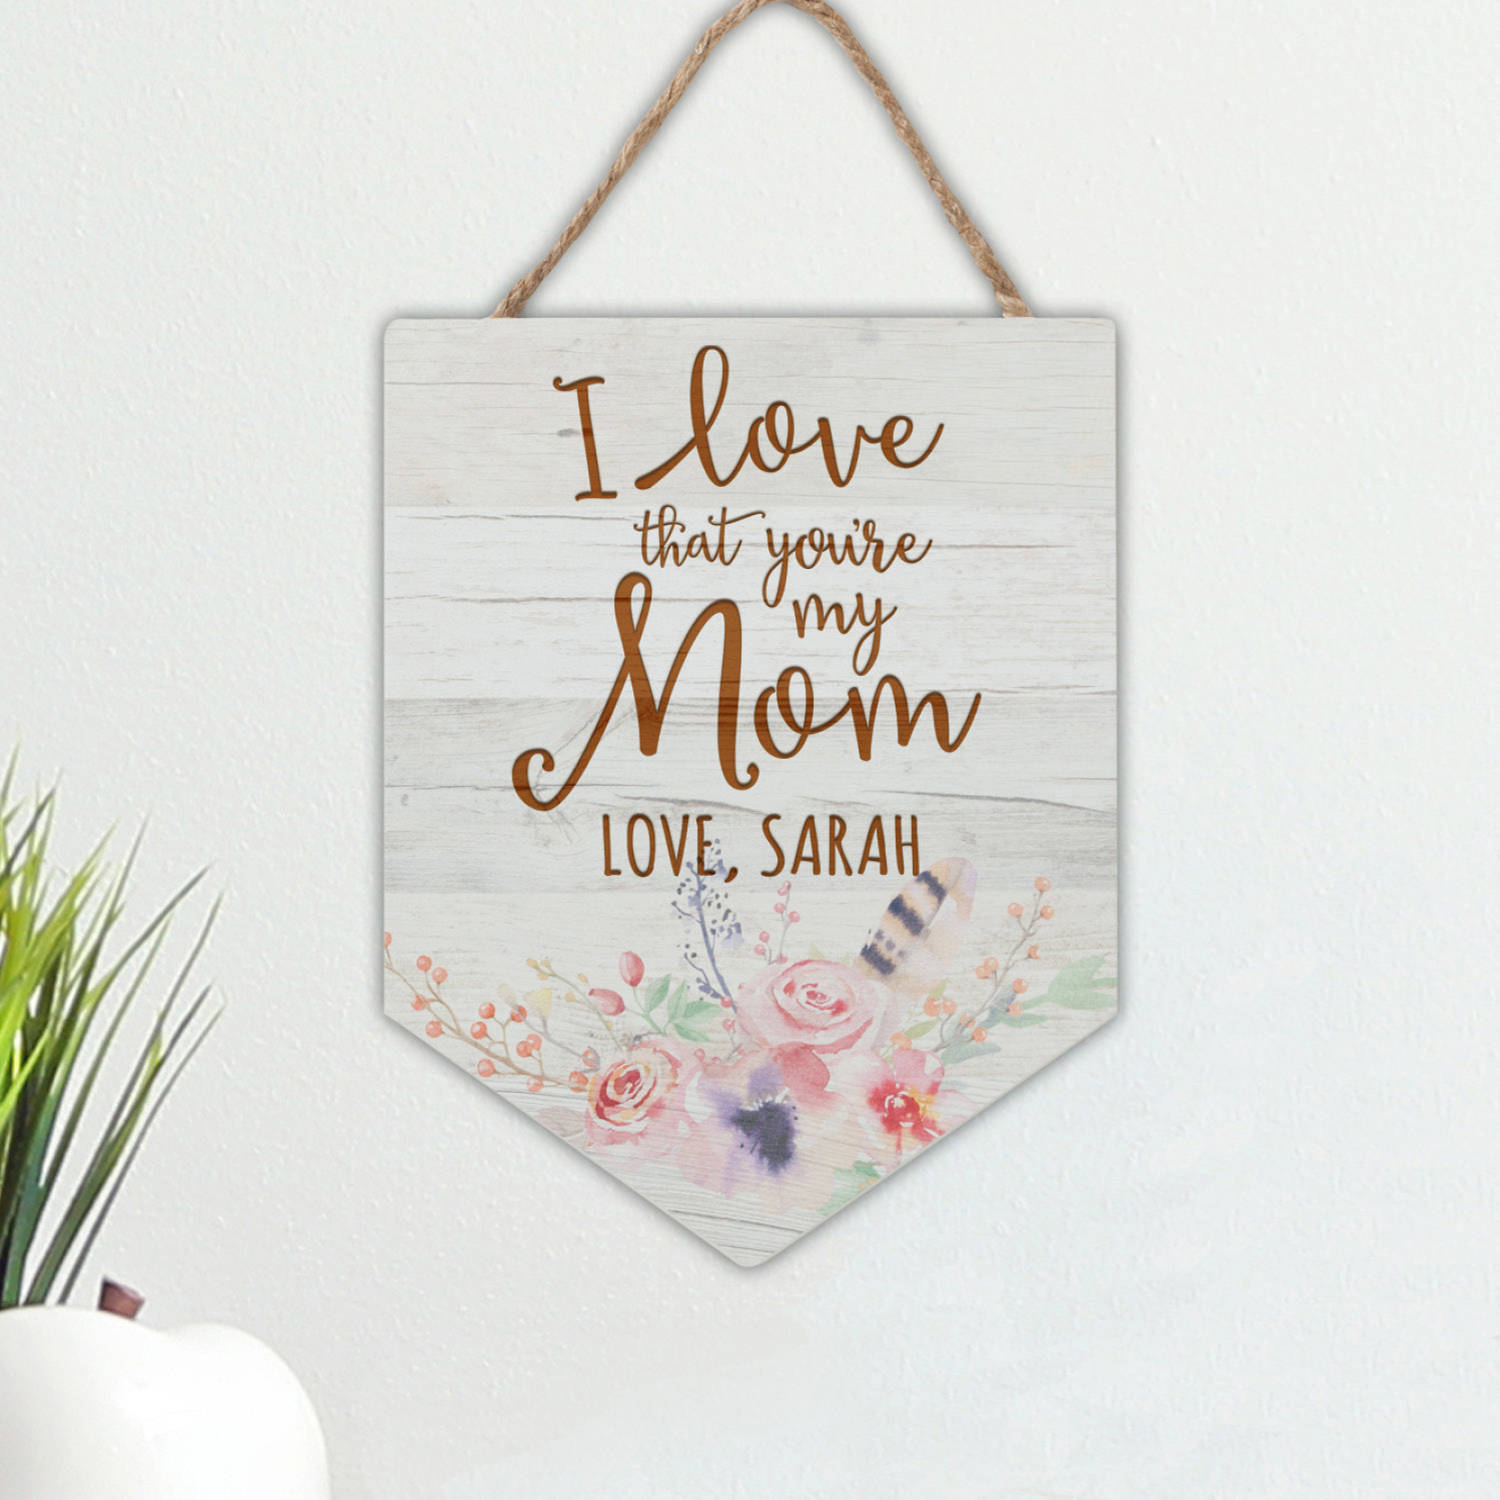 I/We Love That You're Our Mom Personalized Hanging Sign - image 1 of 1